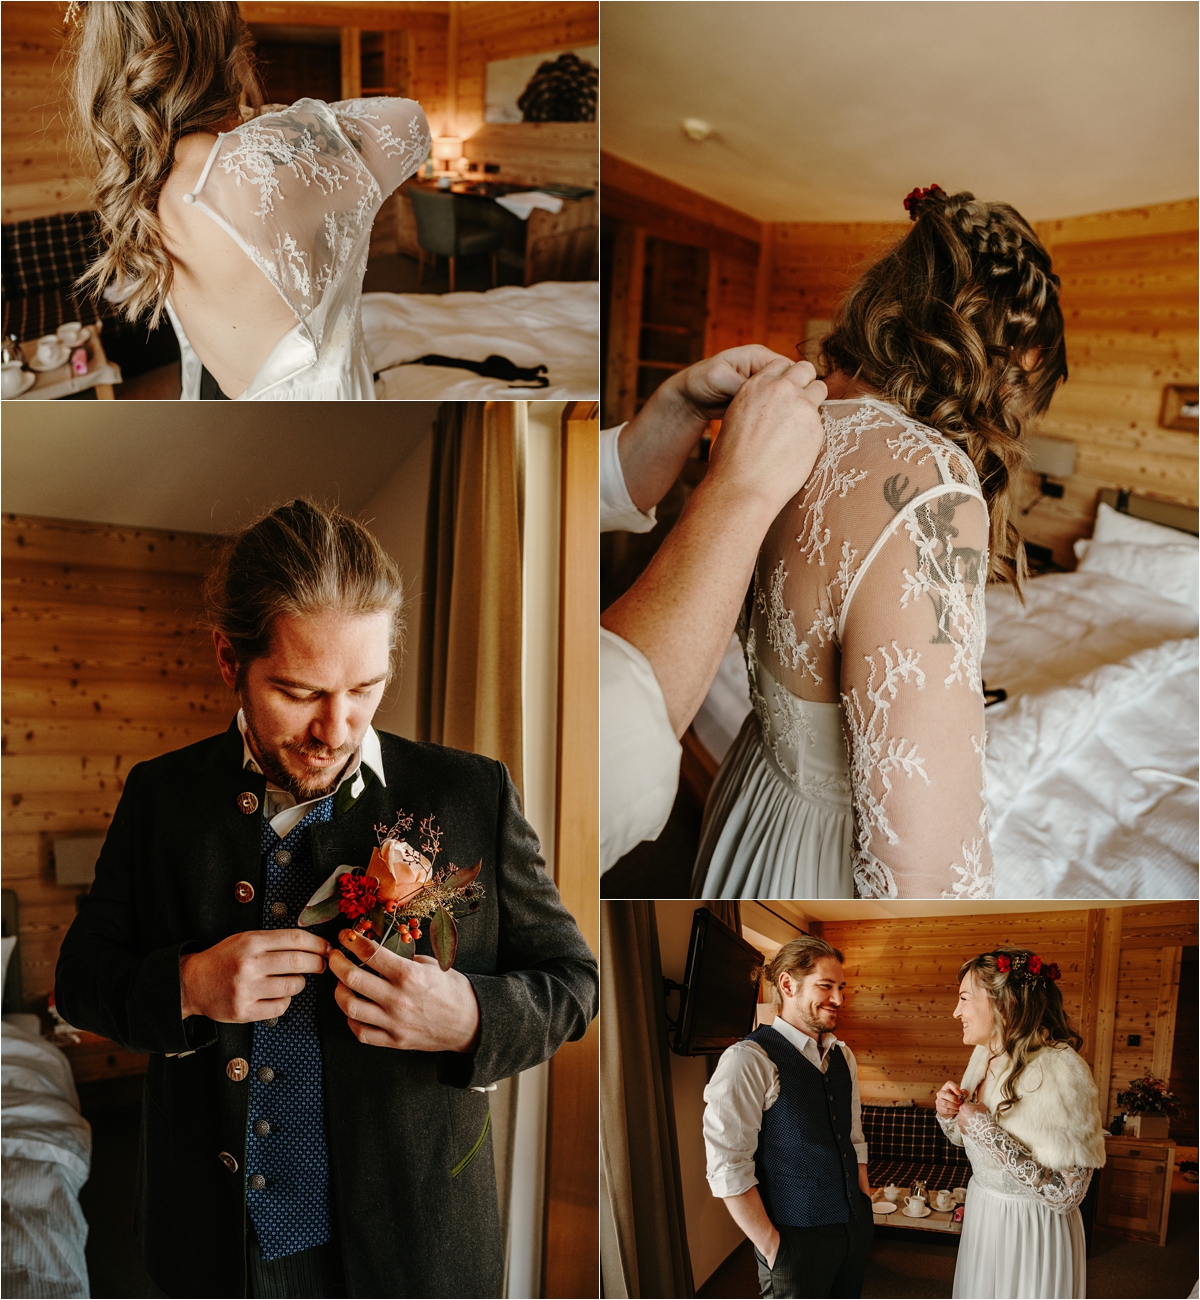 The bide and groom get ready together on their elopement day in the Dolomites. Photos by Wild Connections Photography